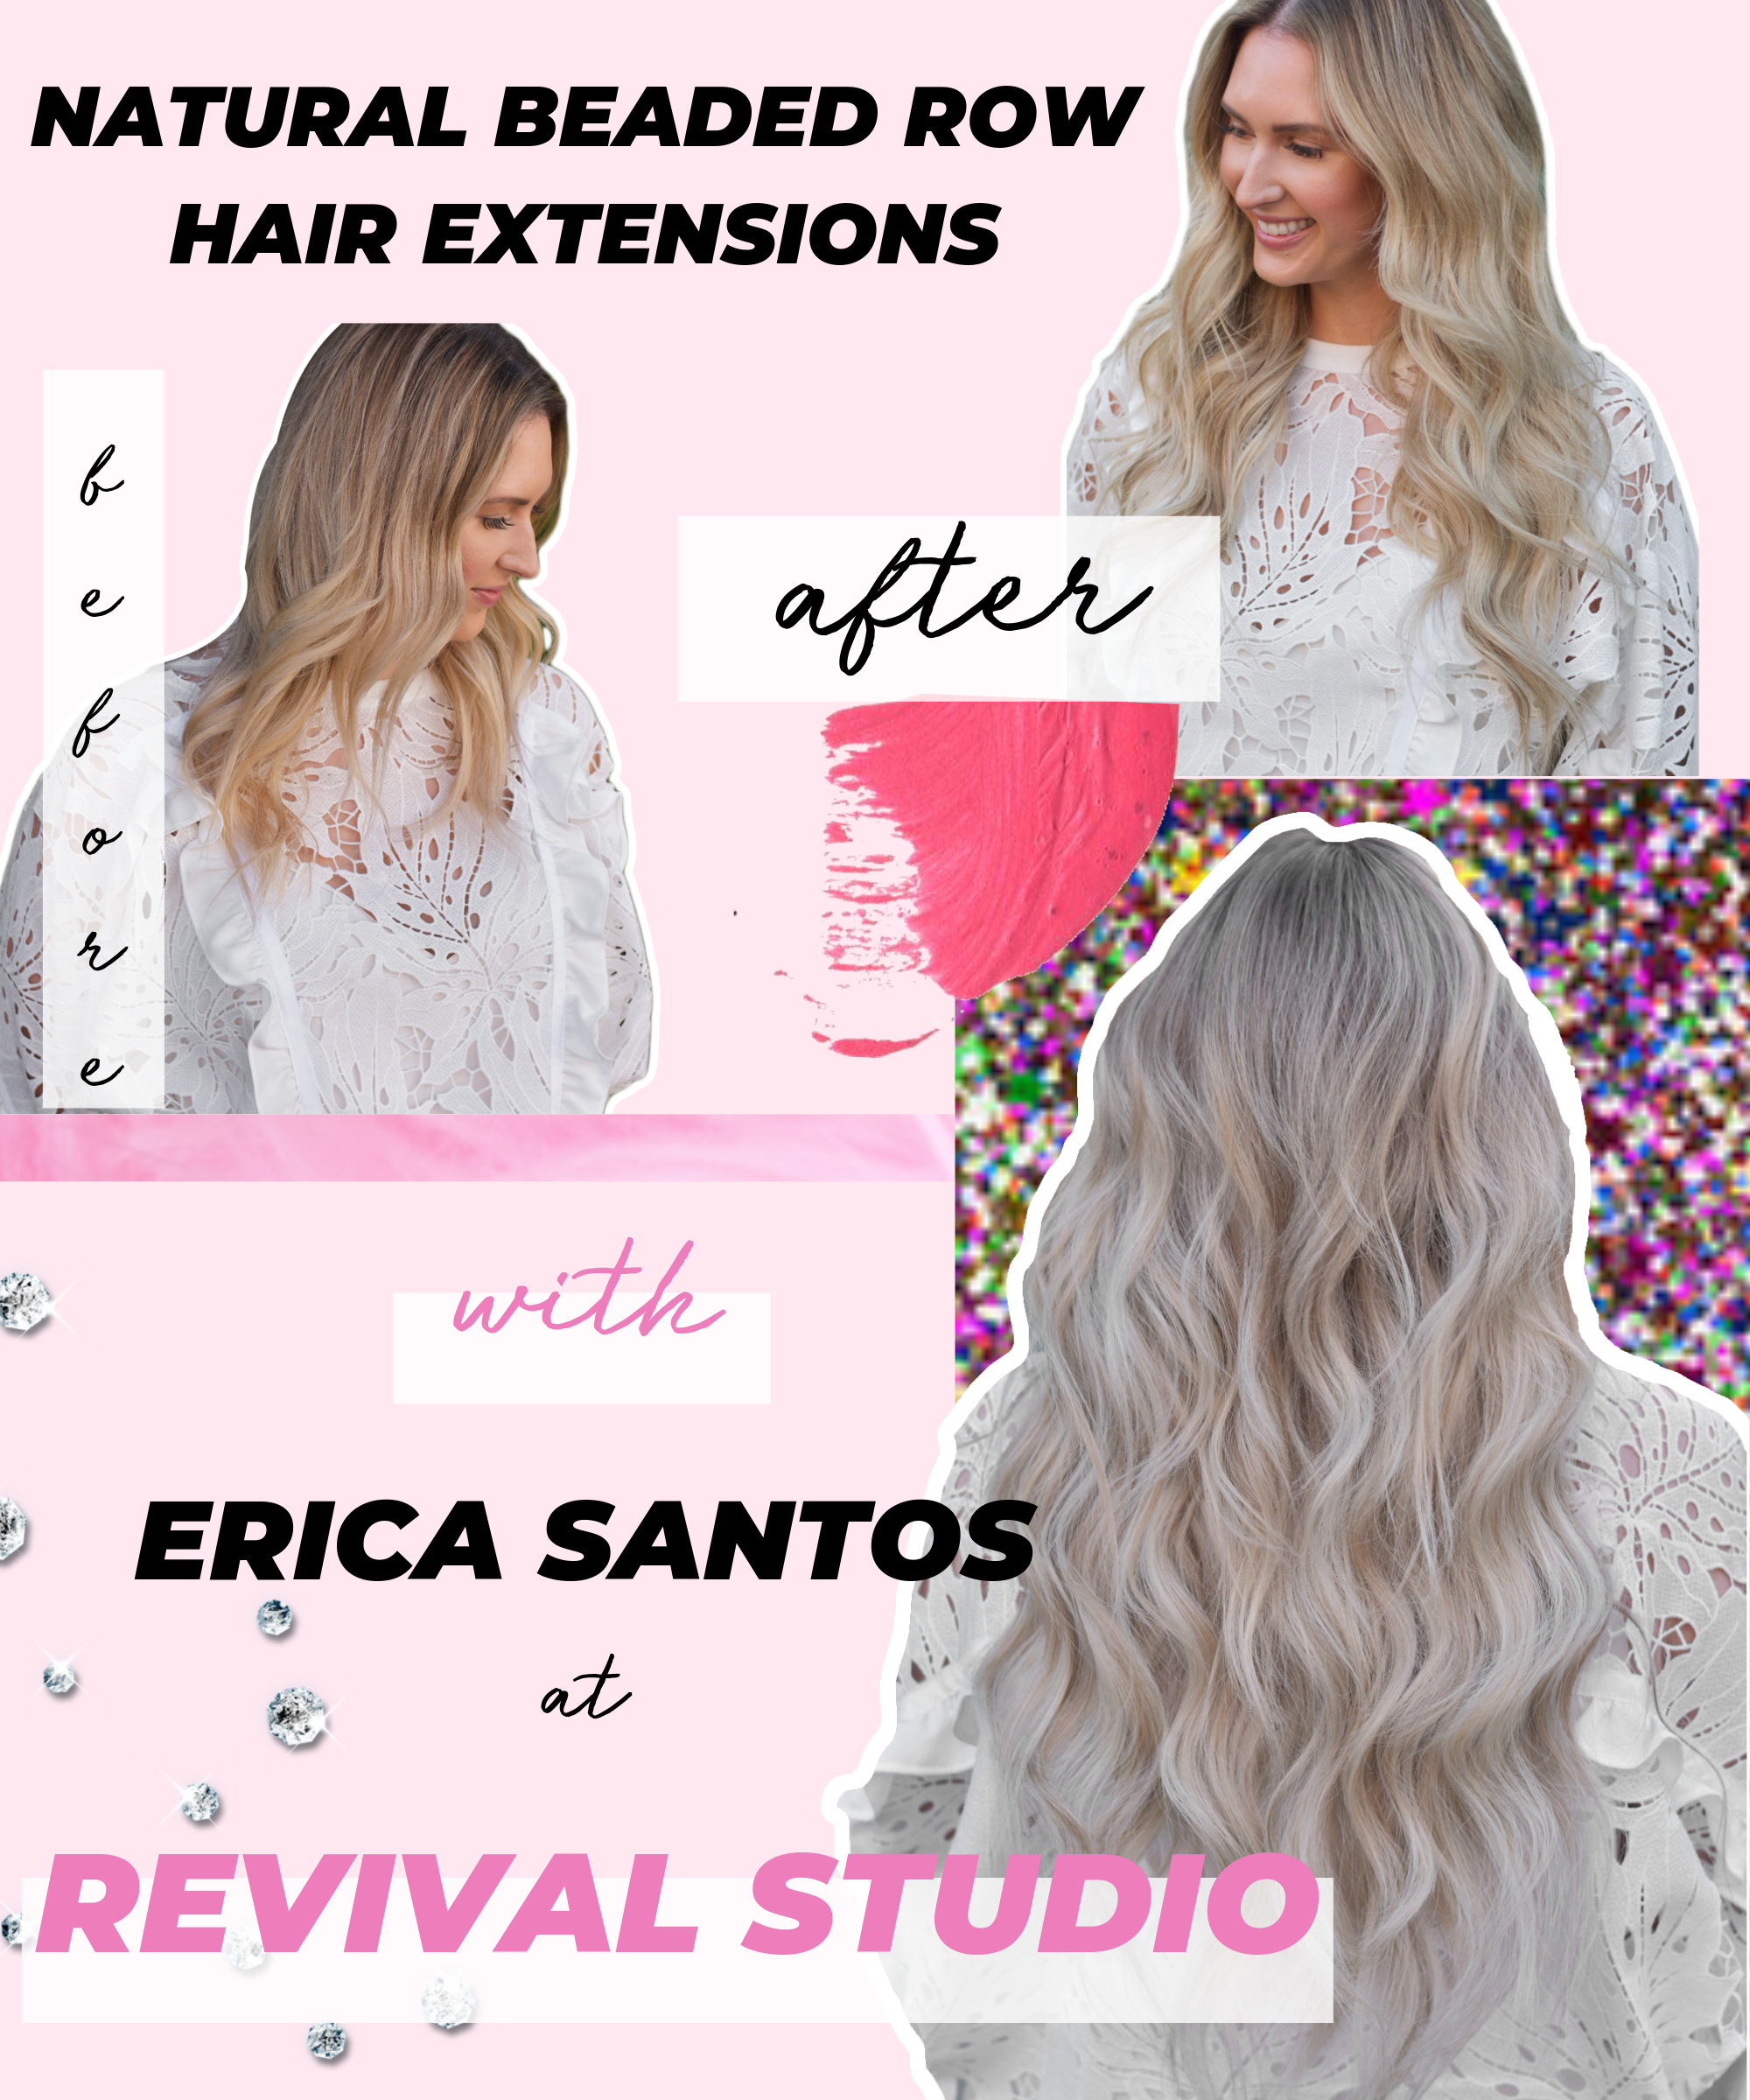 Natural Beaded Row Hair Extensions with Revival Studio